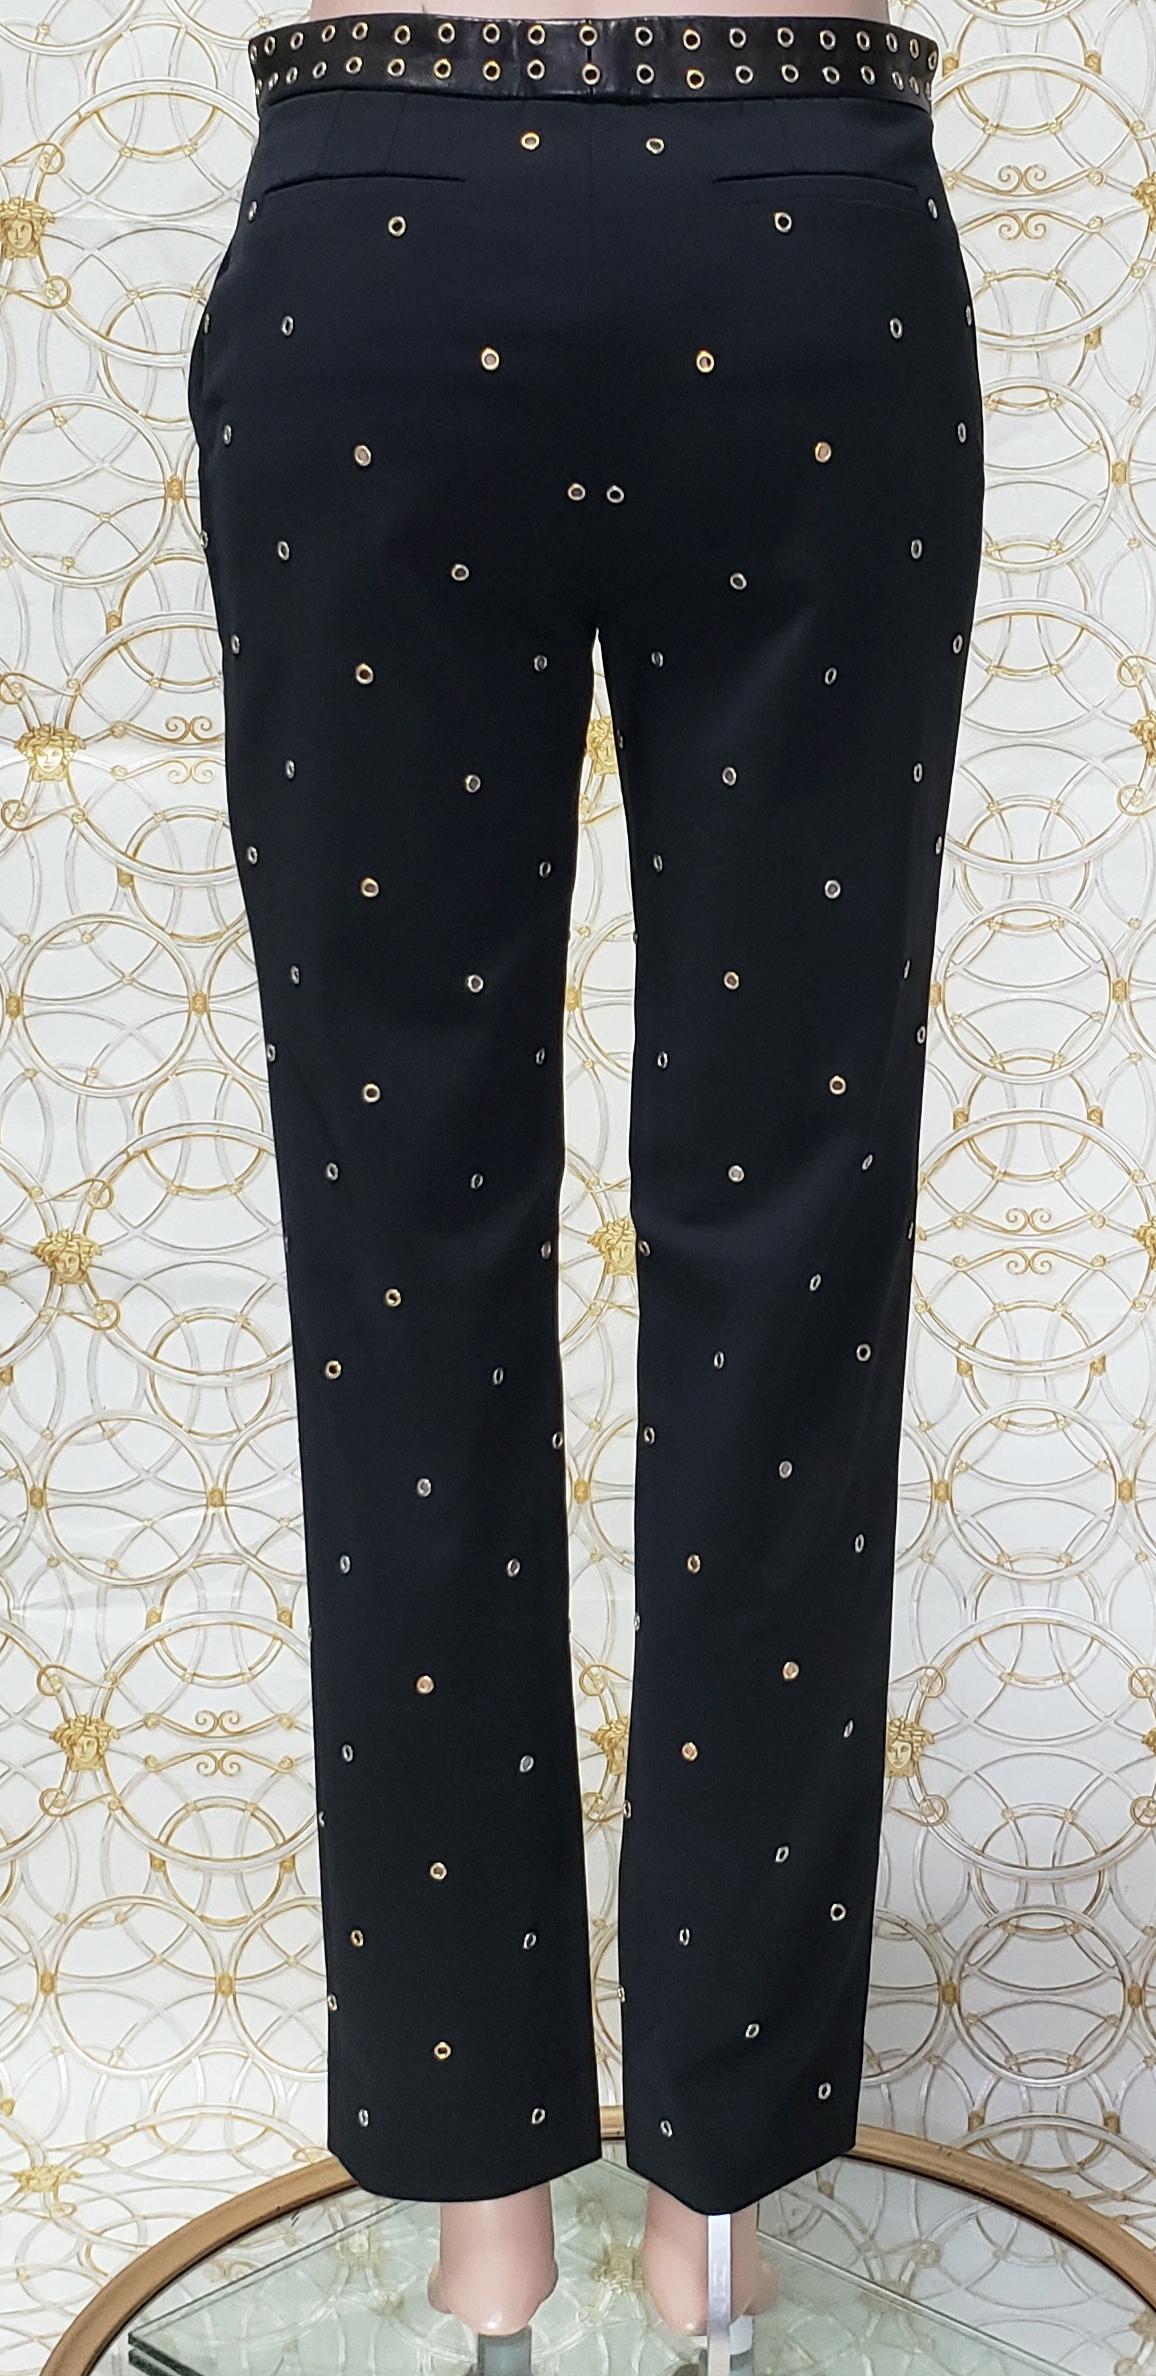 Women's Resort 2012 Look # 5 VERSACE BLACK STRETCHY PANTS with RIVETS size 38 - 2 For Sale